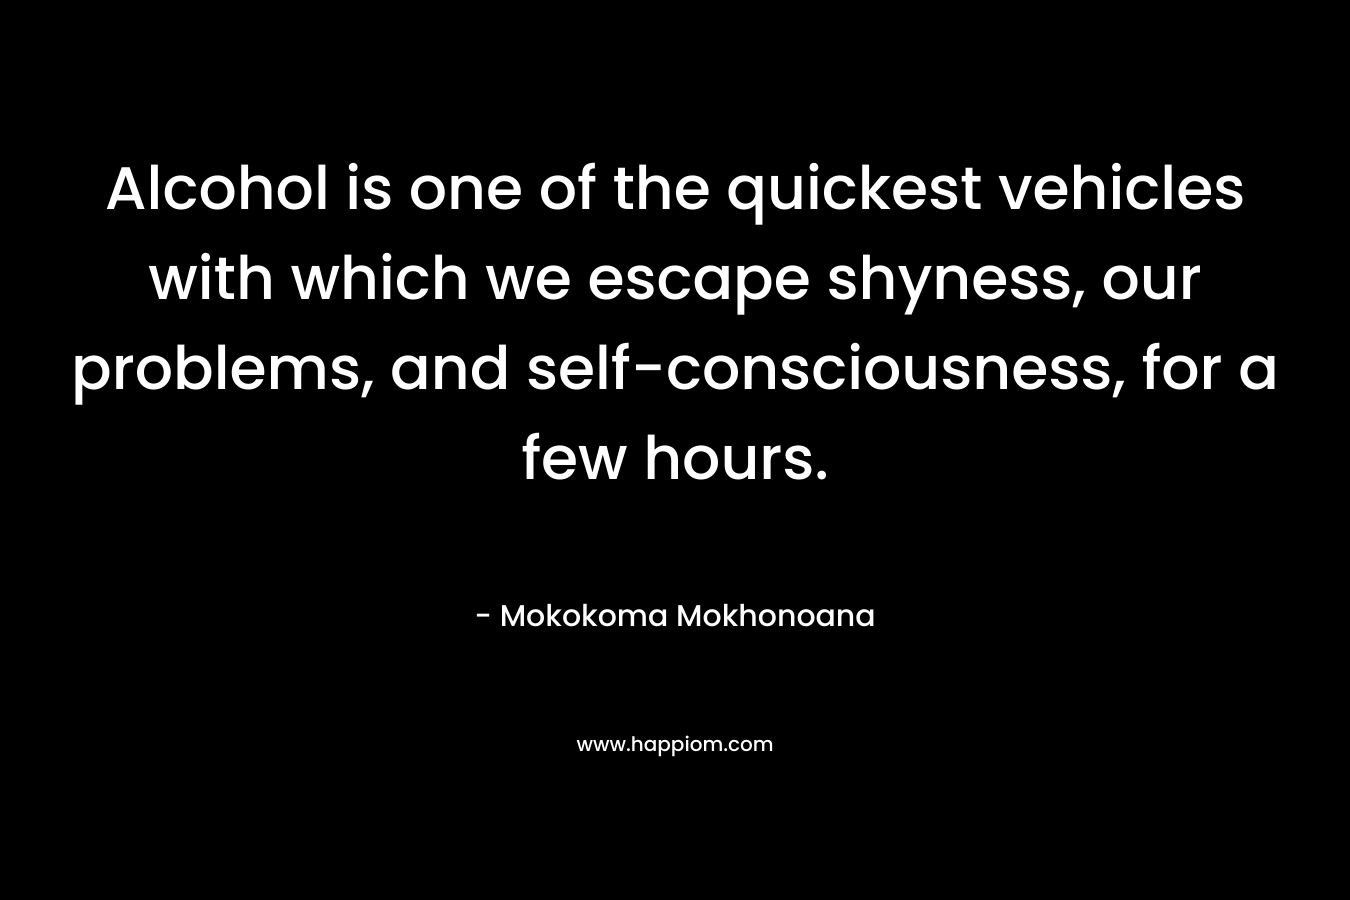 Alcohol is one of the quickest vehicles with which we escape shyness, our problems, and self-consciousness, for a few hours.